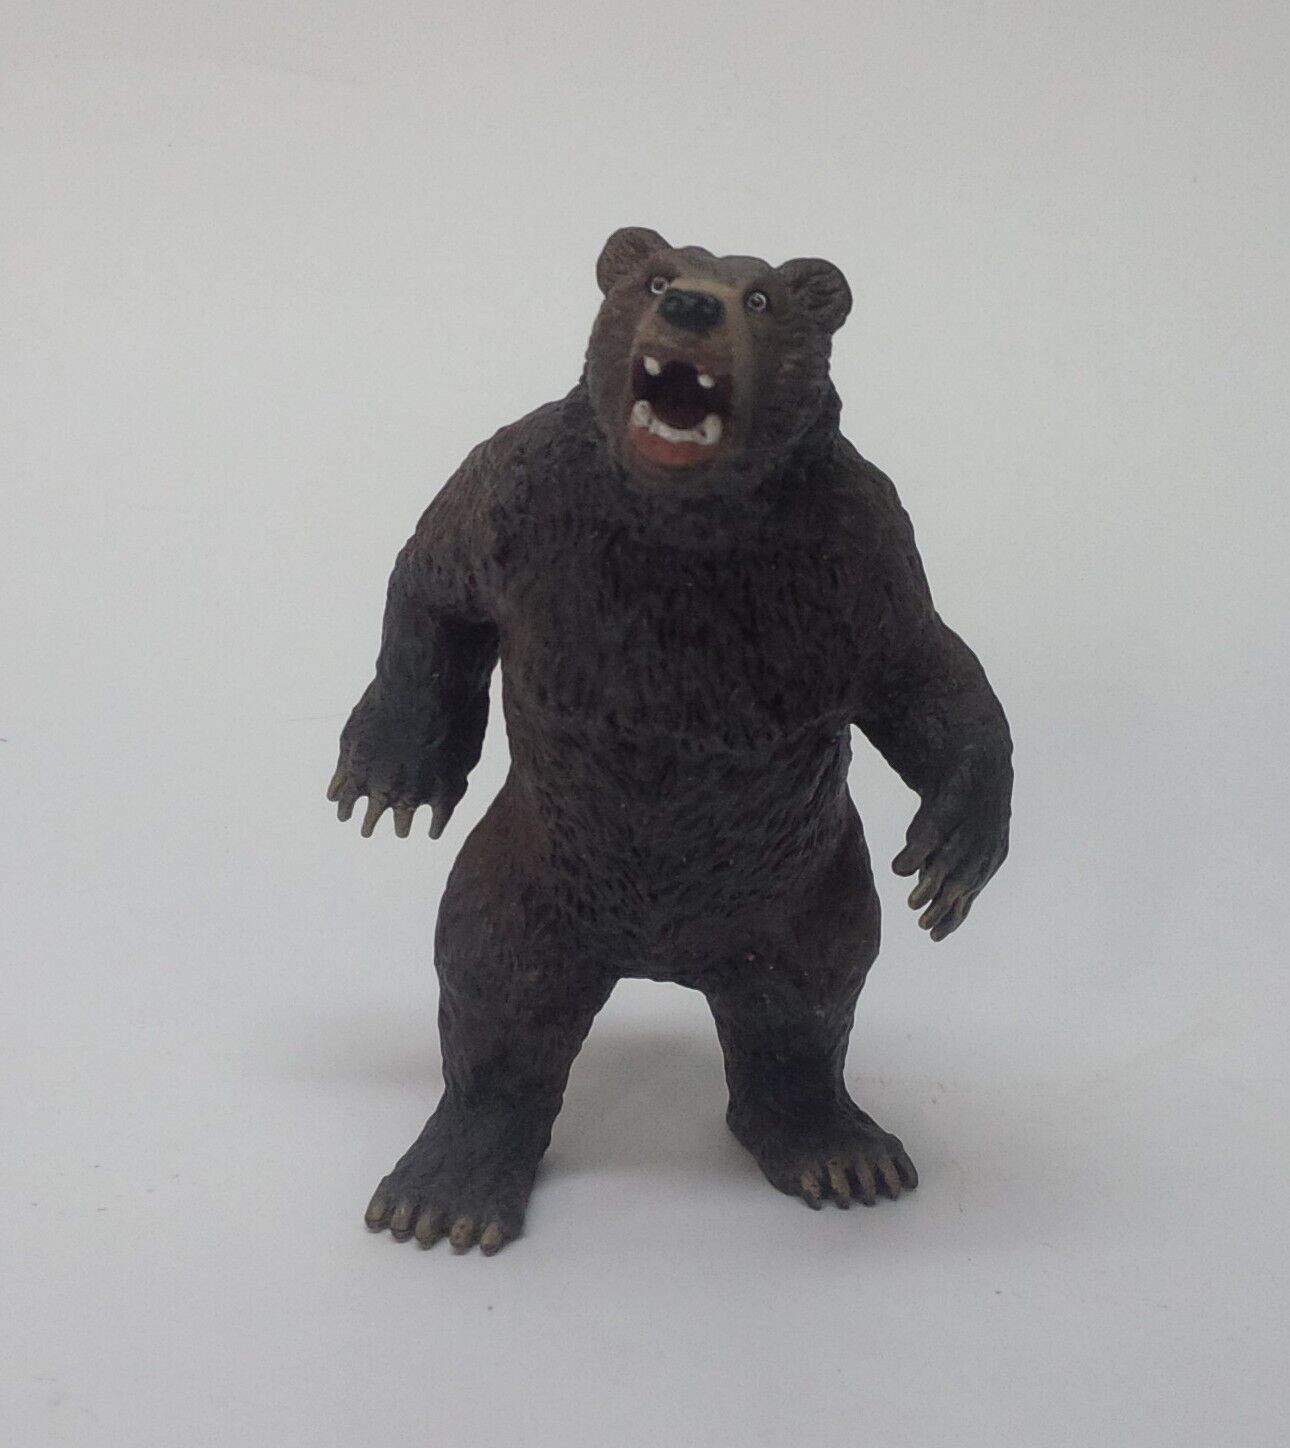 Papo Standing Roaring Brown Grizzly Bear Retired 2003 Figure Wildlife Toy - Rare